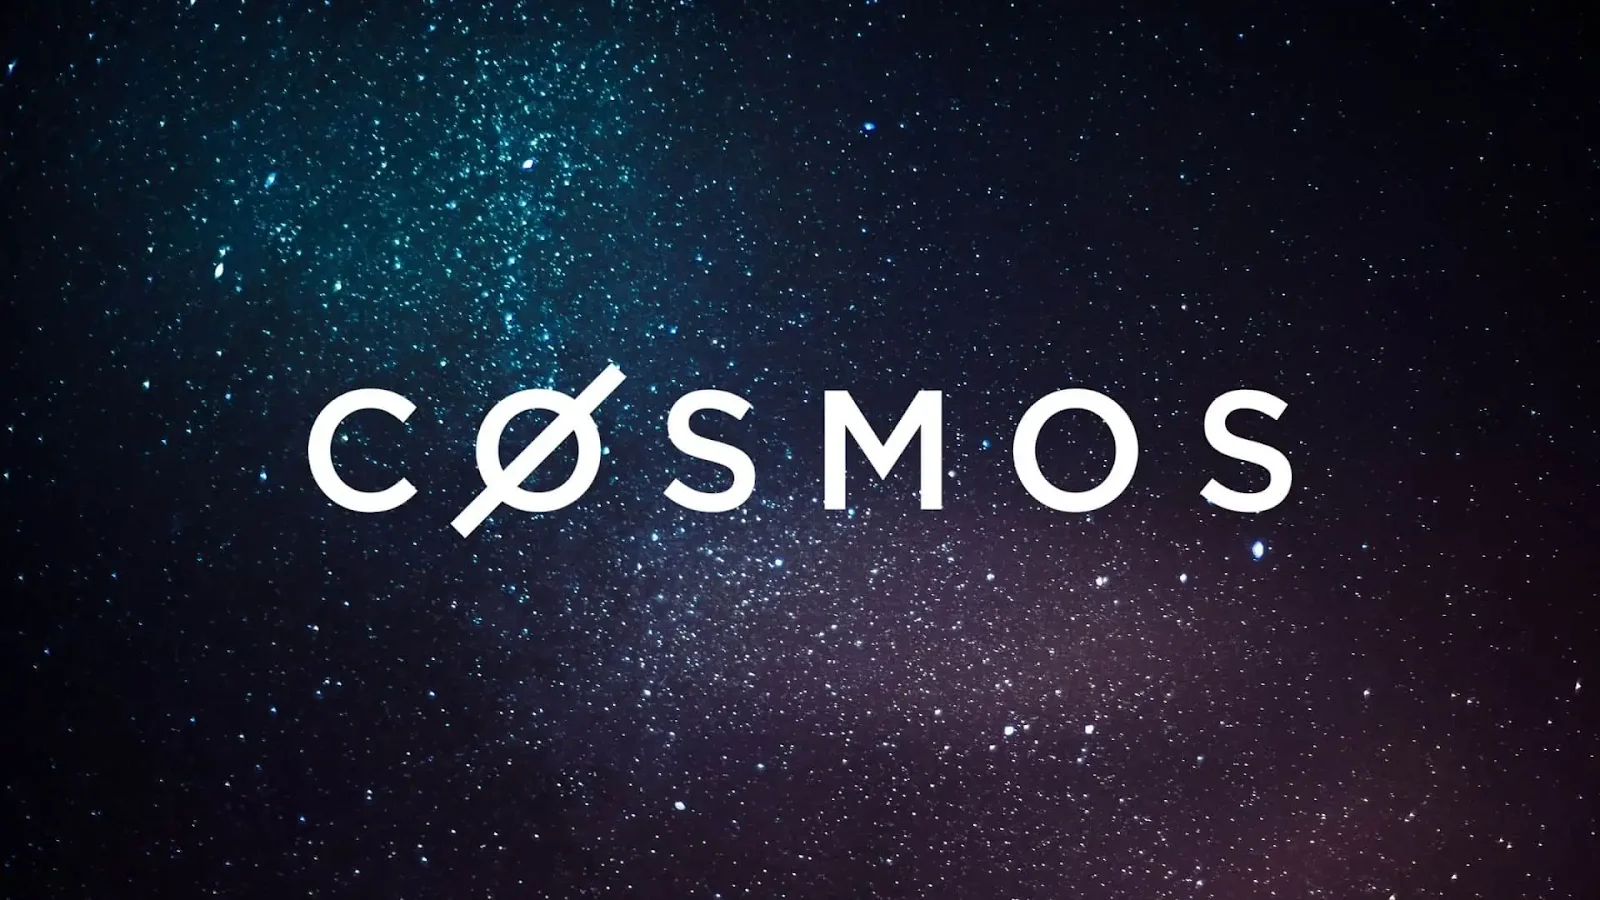 Cosmos chain overview: ecosystem and technology